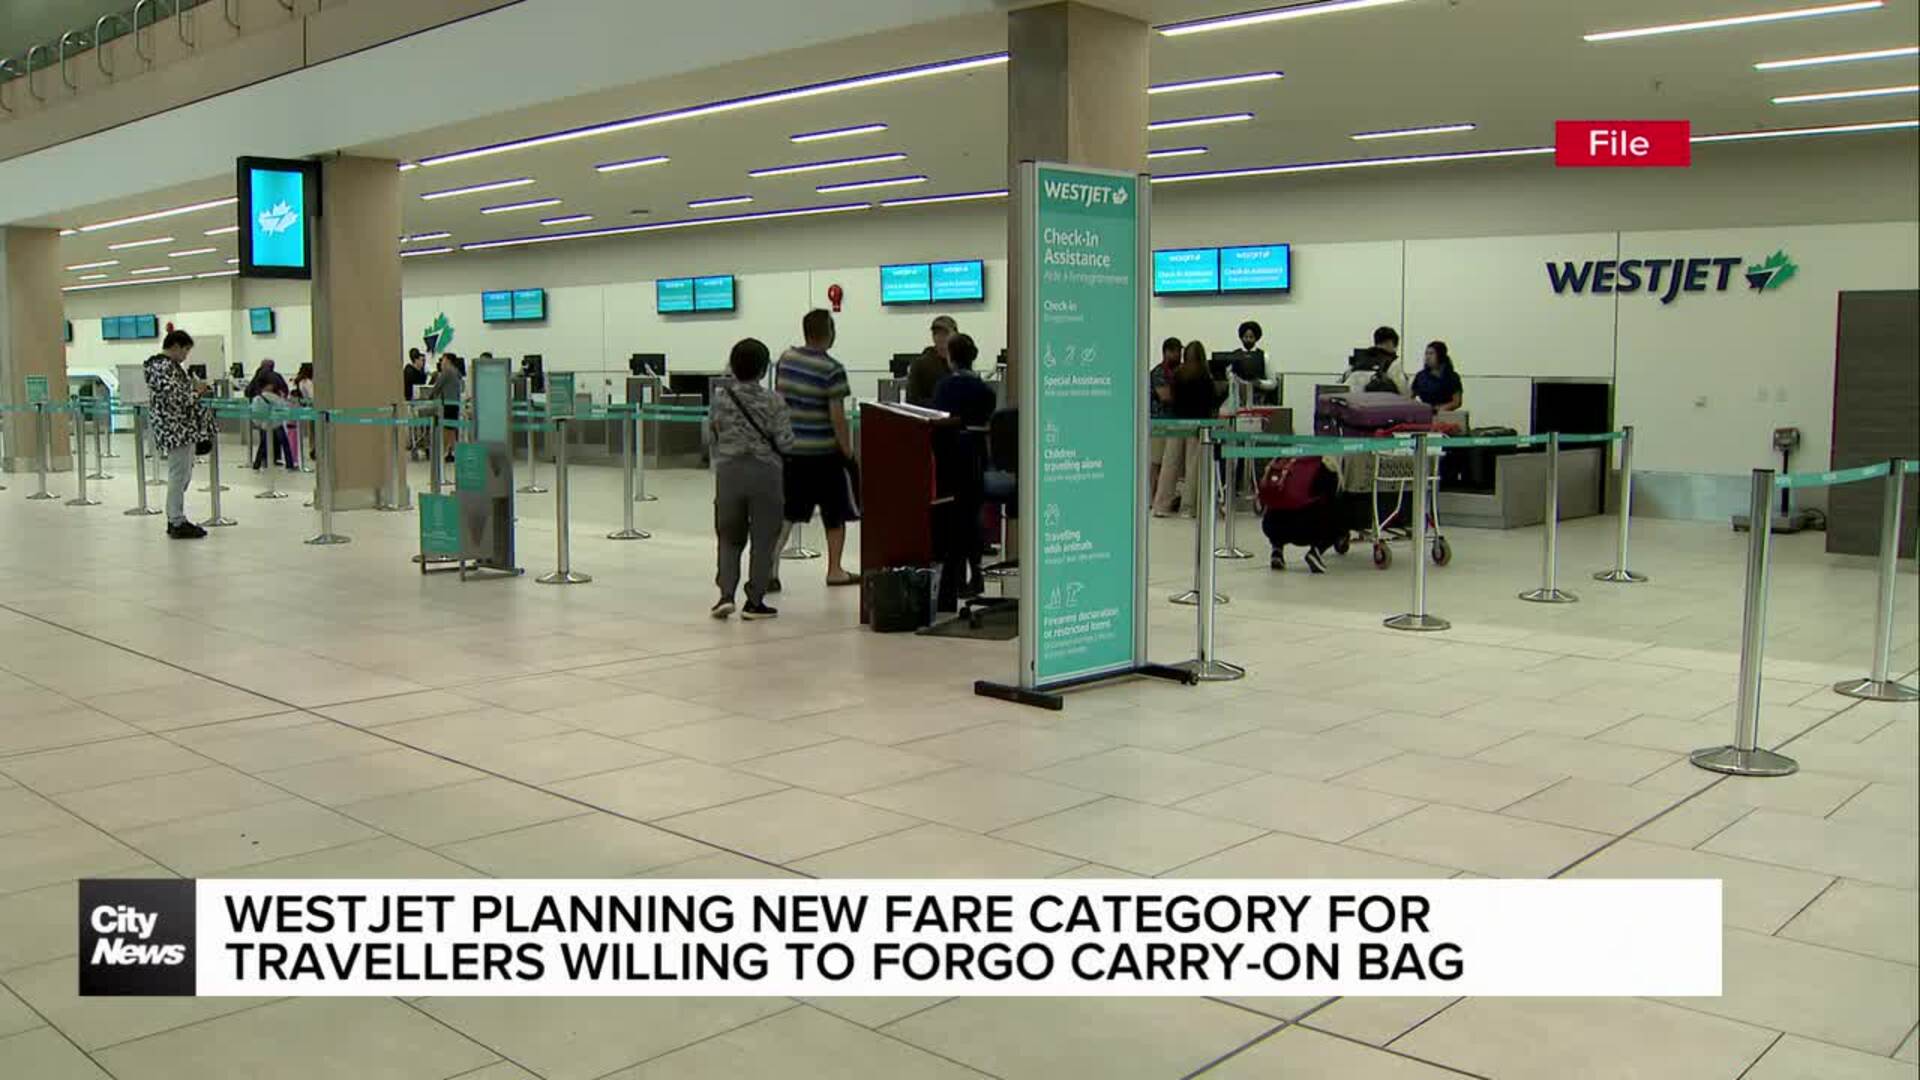 WestJet's new fare category for those willing to forgo carry-on bag